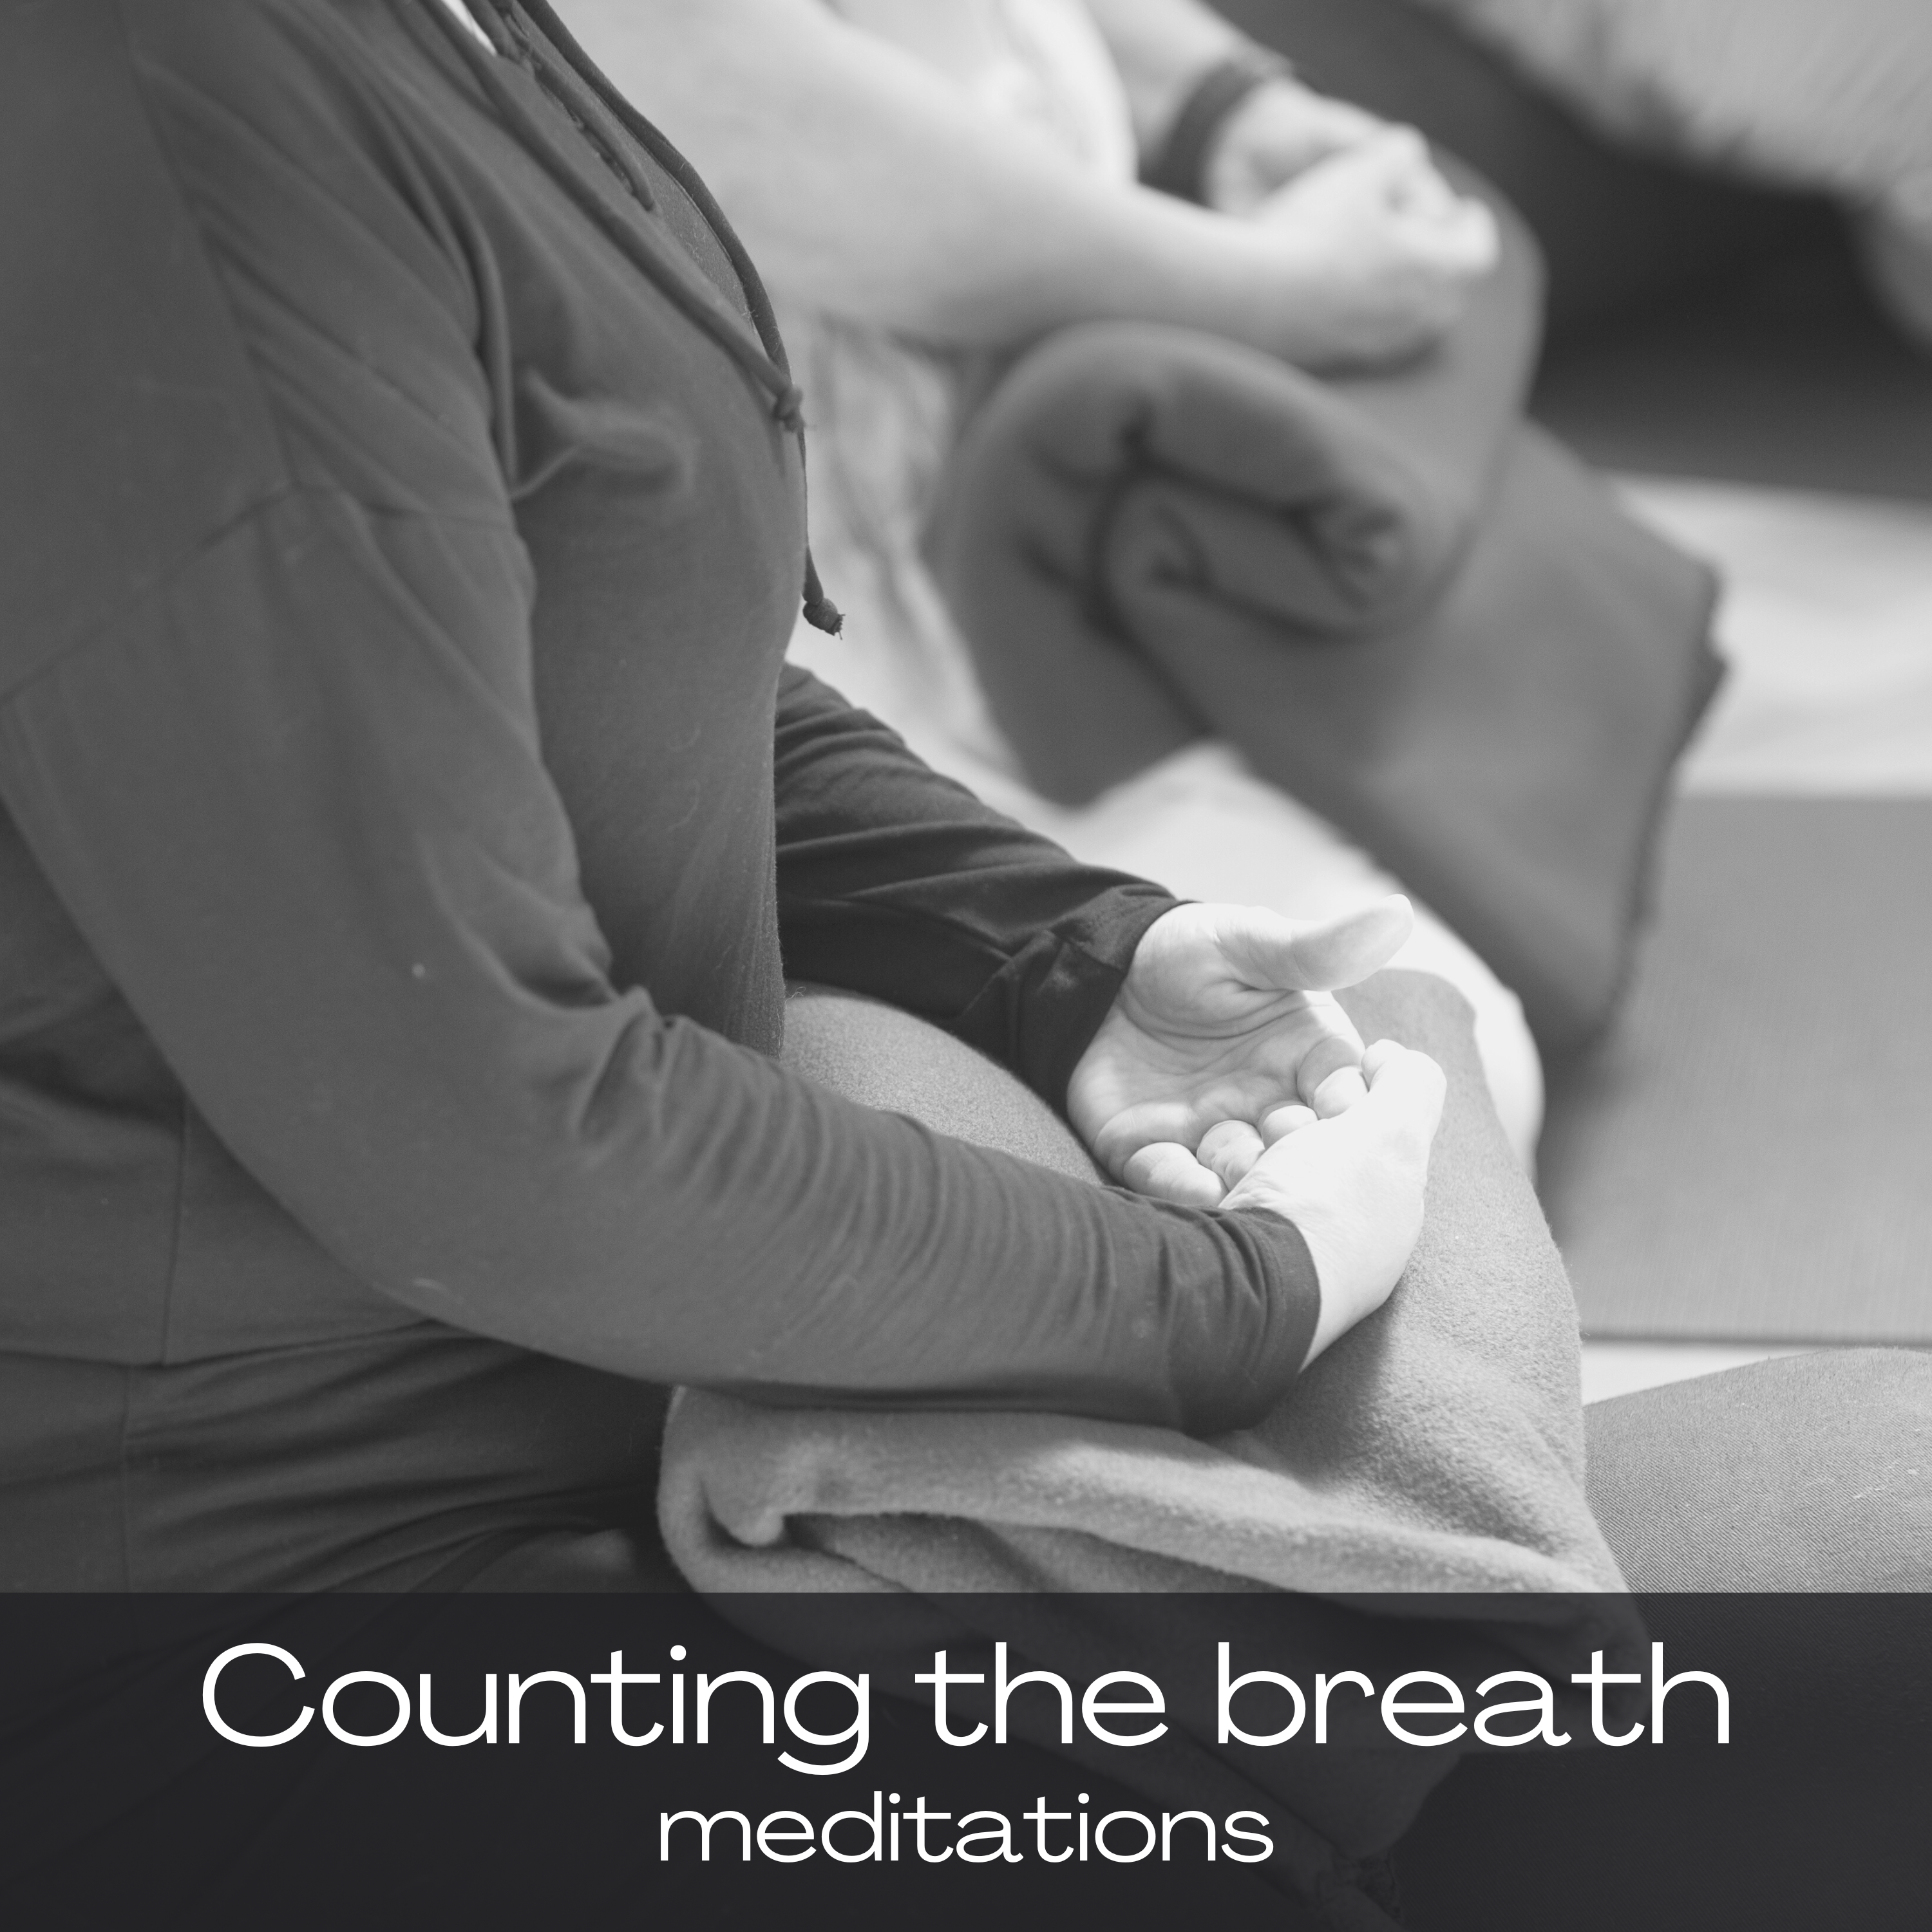 Counting Breath Meditations